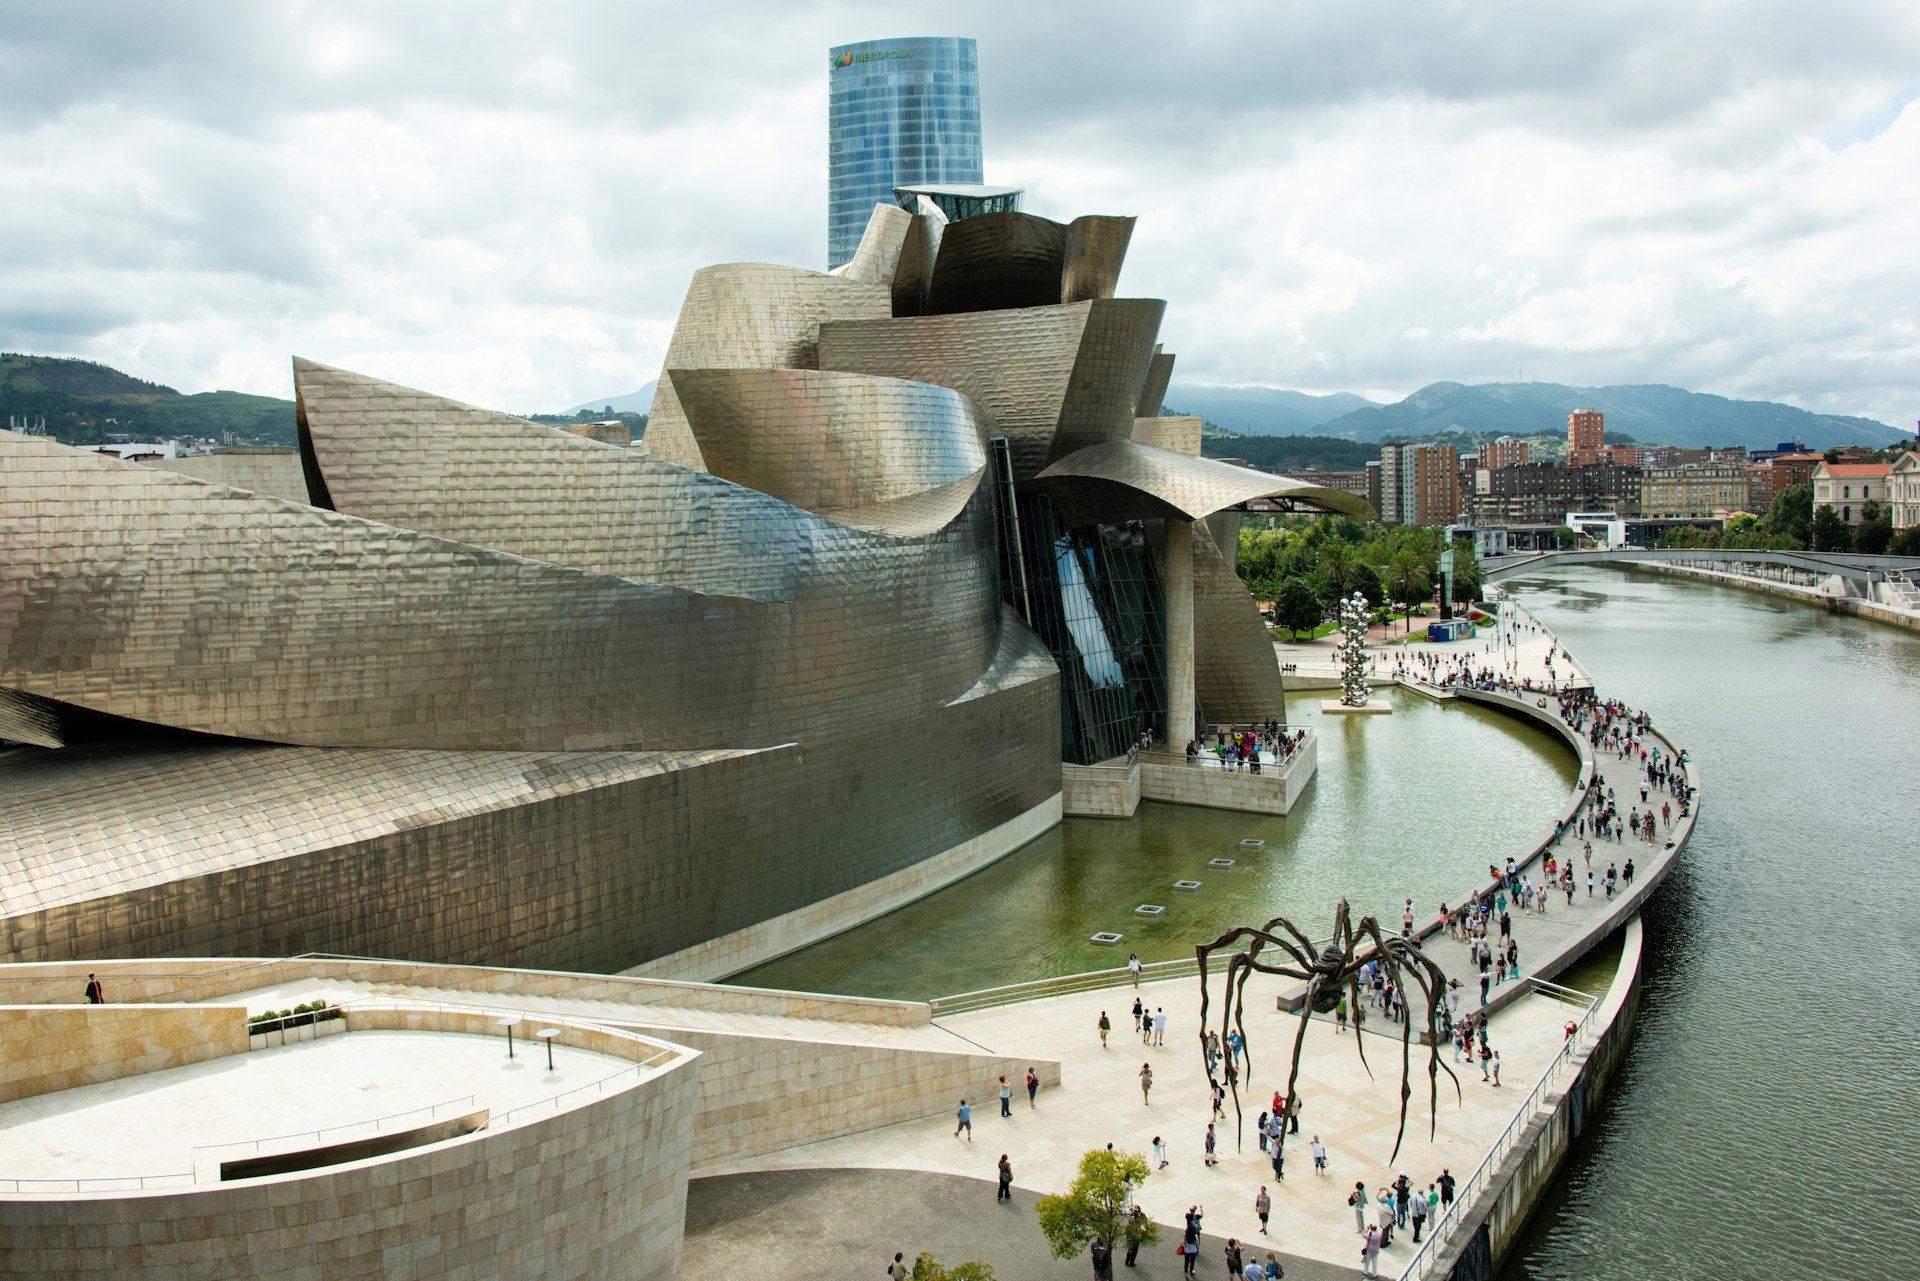 A view of the Guggenheim Museum, Bilbao, Basque Country, Spain